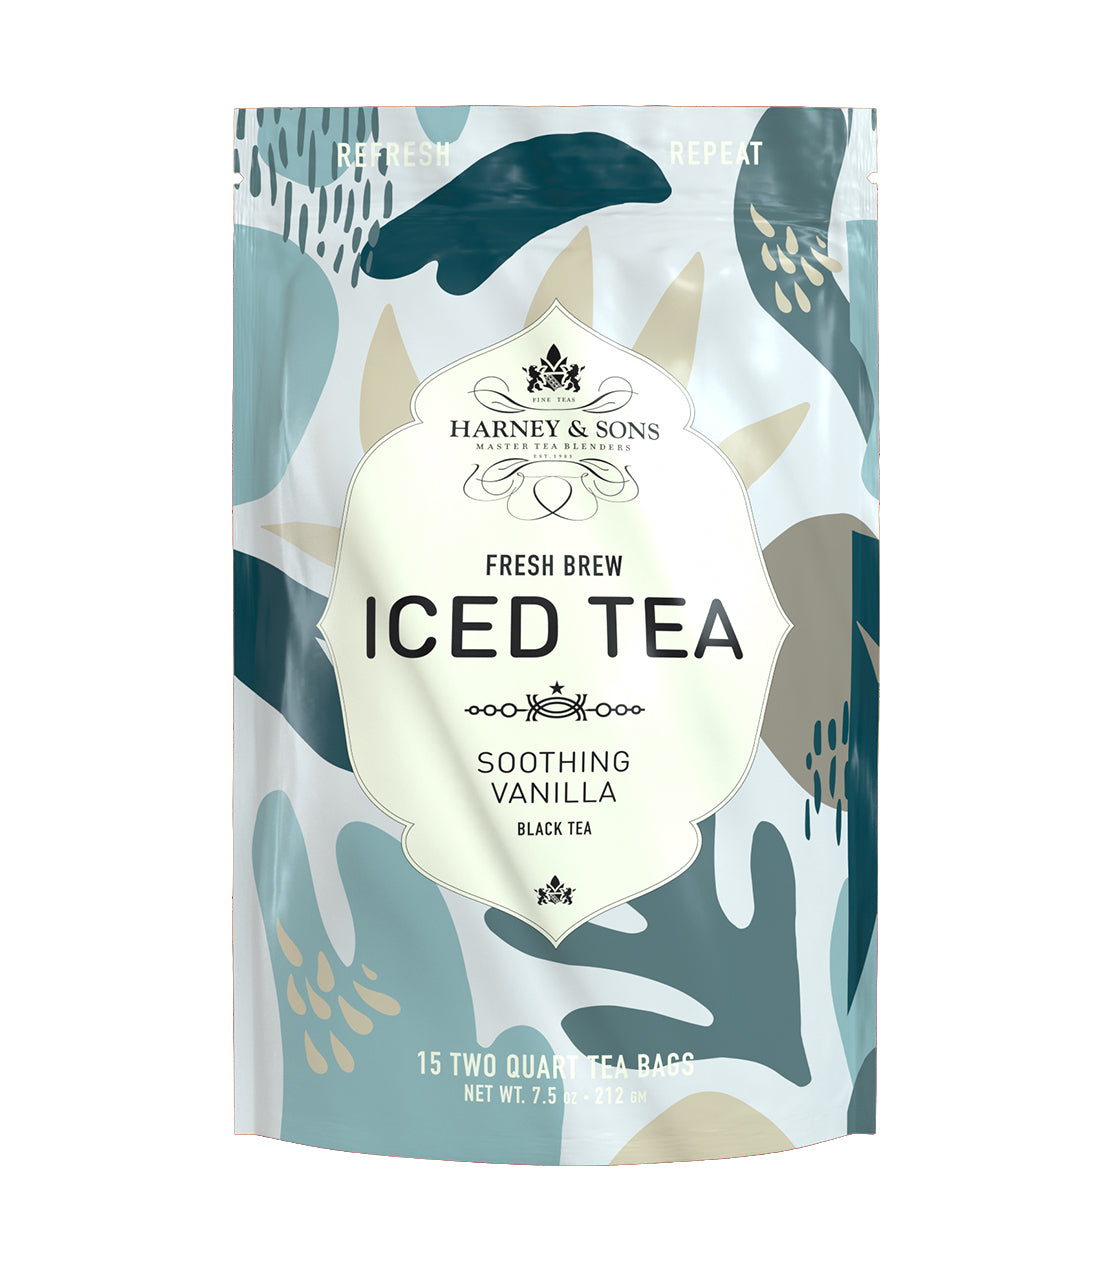 Soothing Vanilla Fresh Brew Iced Tea - Iced Tea Pouches Bag of 15 Pouches - Harney & Sons Fine Teas